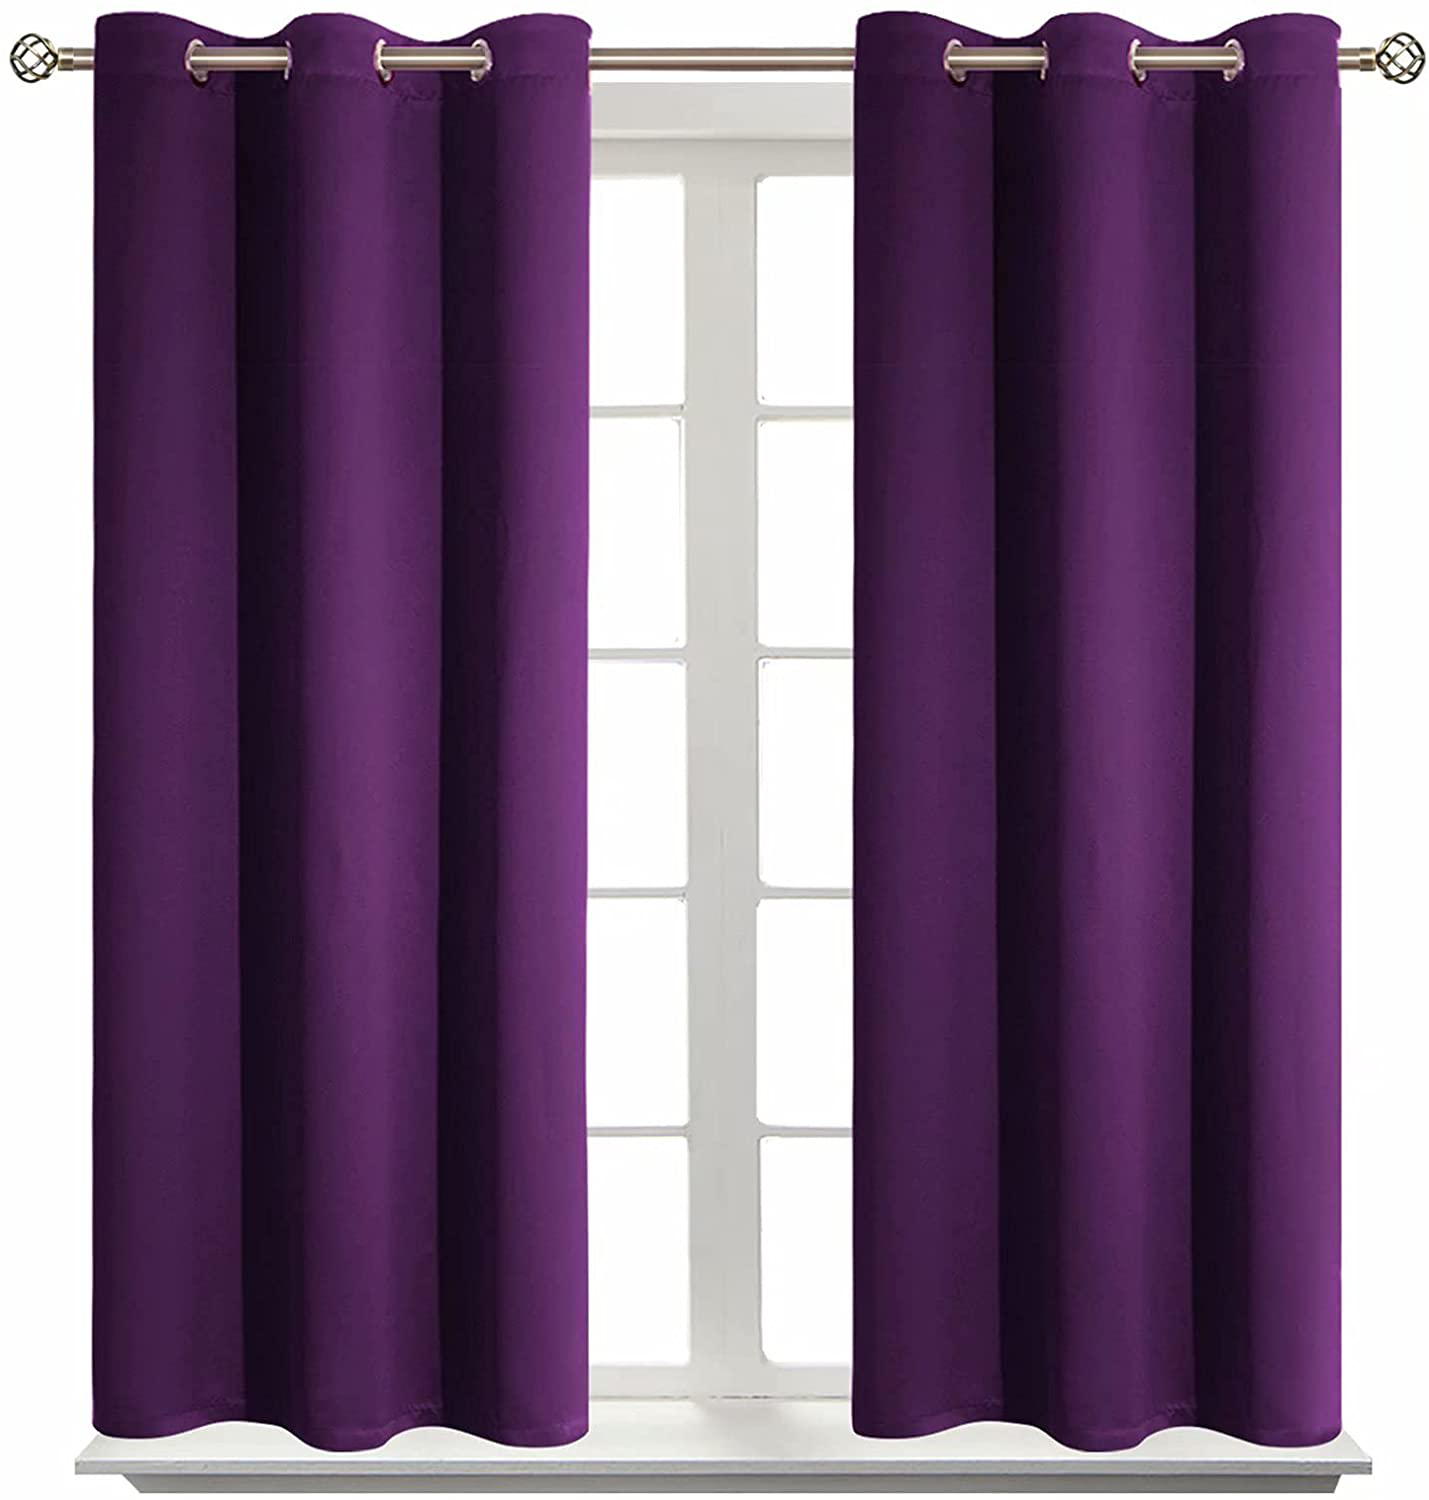 BGment Blackout Curtains - Grommet Thermal Insulated Room Darkening Bedroom and Living Room Curtain, Set of 2 Panels (38 x 45 Inch, Purple)